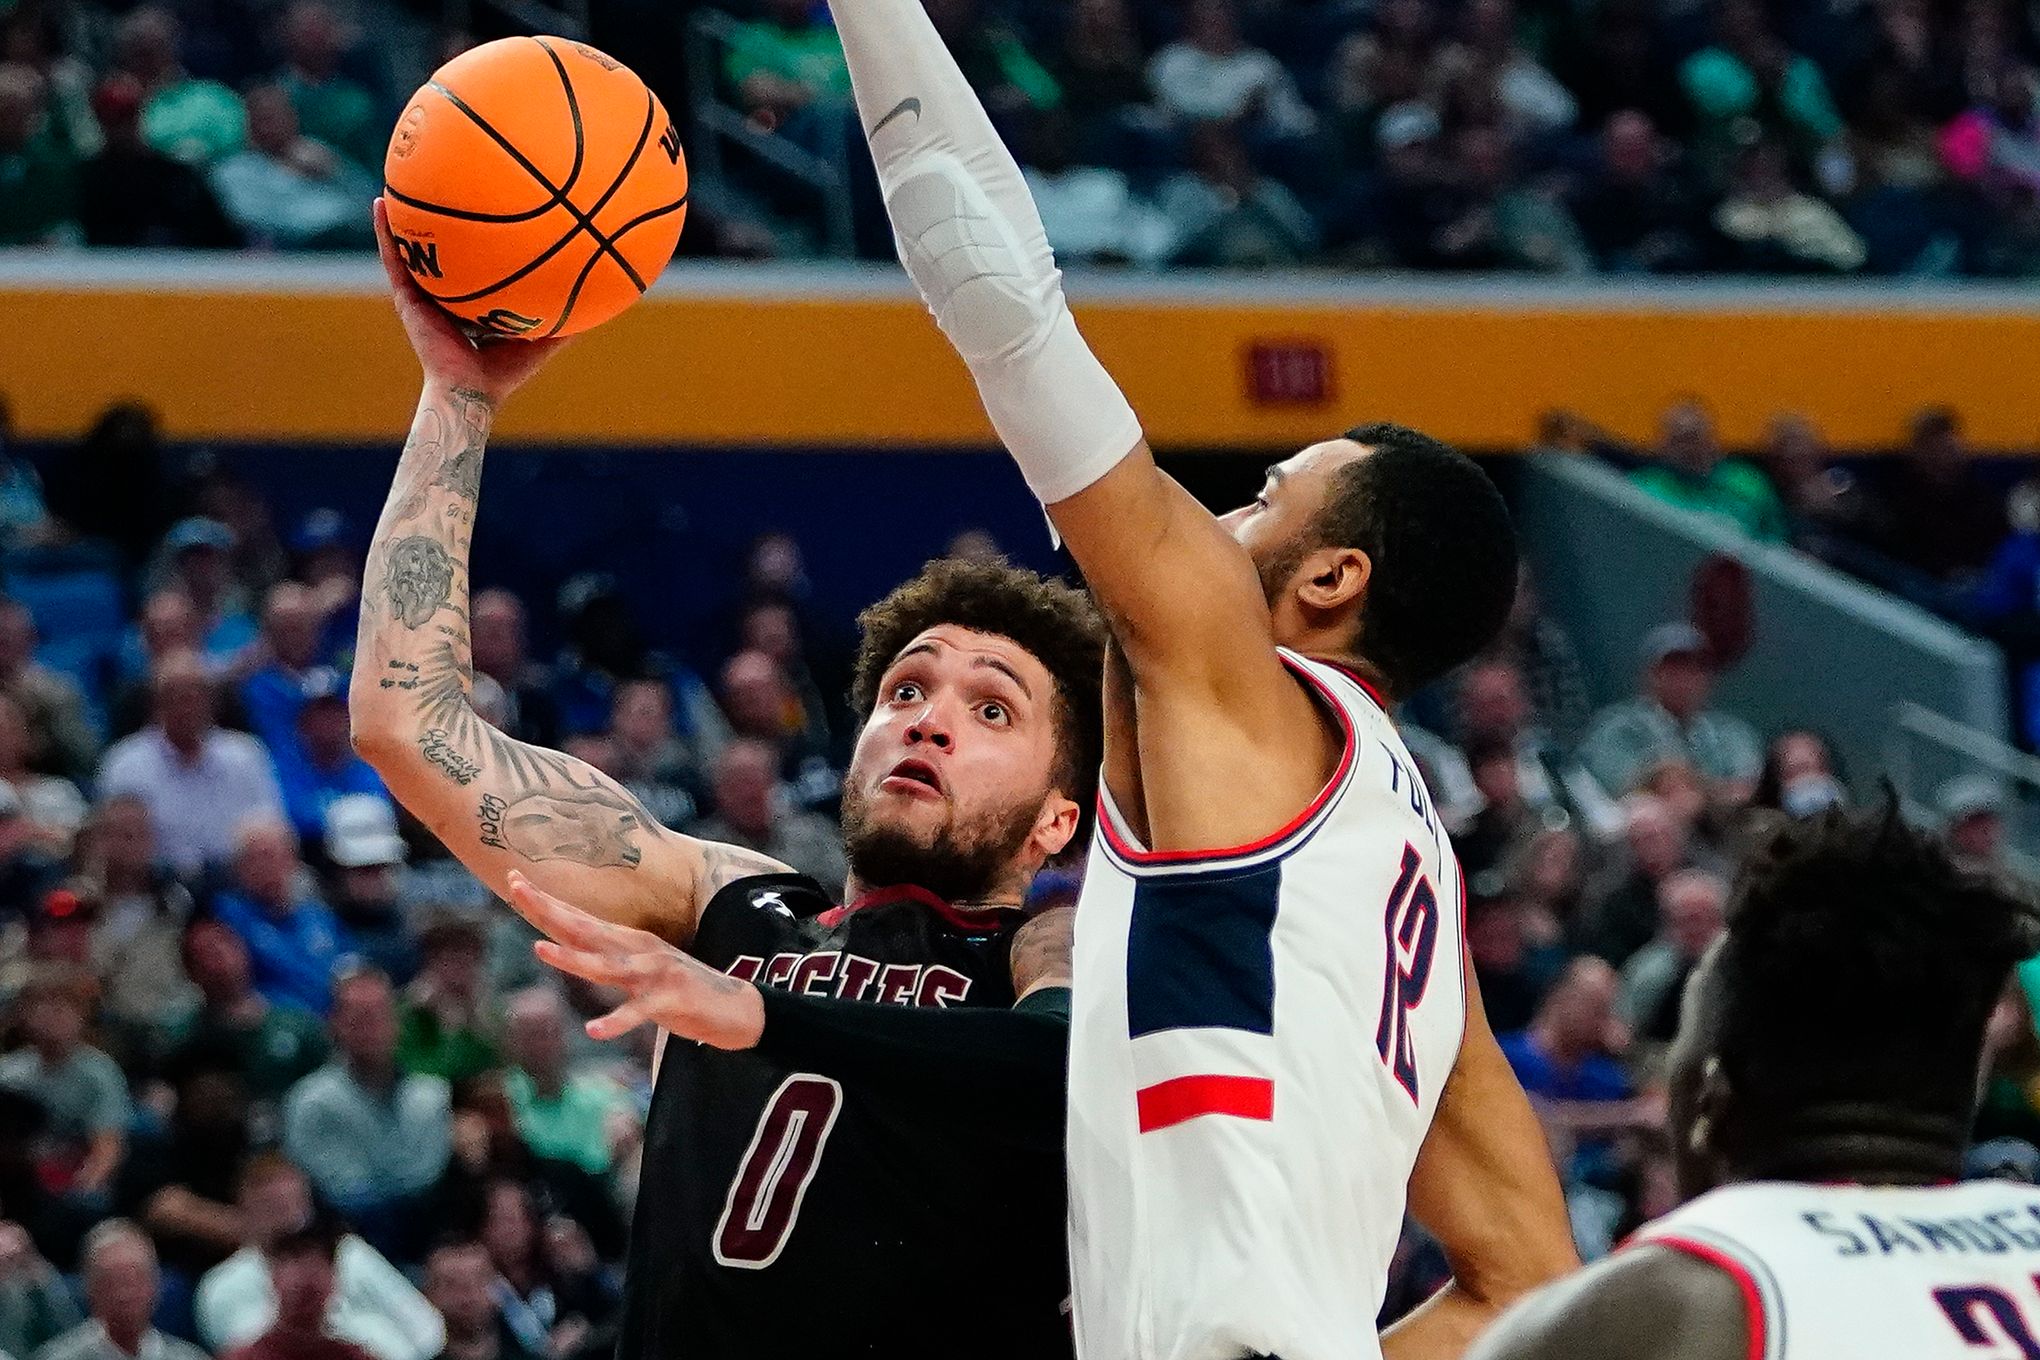 5th-Seeded UConn Meets New Mexico St. In NCAA 1st Round